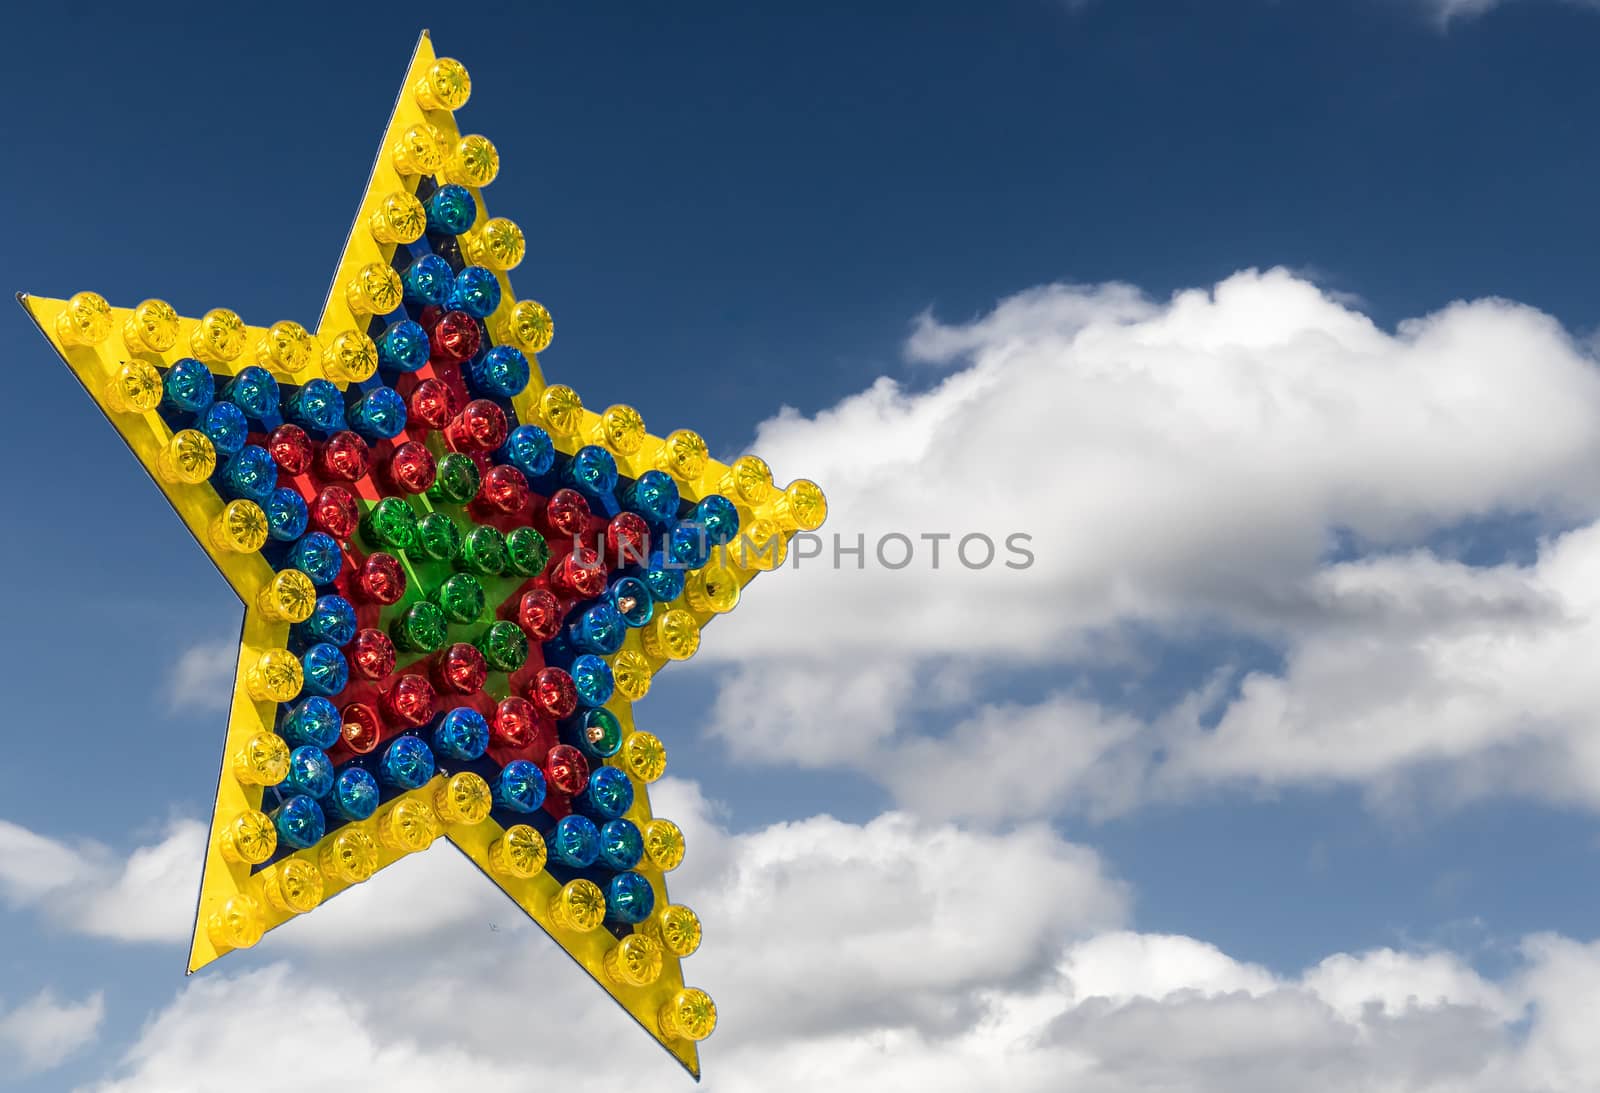 Large colorful star of differently colored lamps exempted in front of a blue sky with clouds, illustration